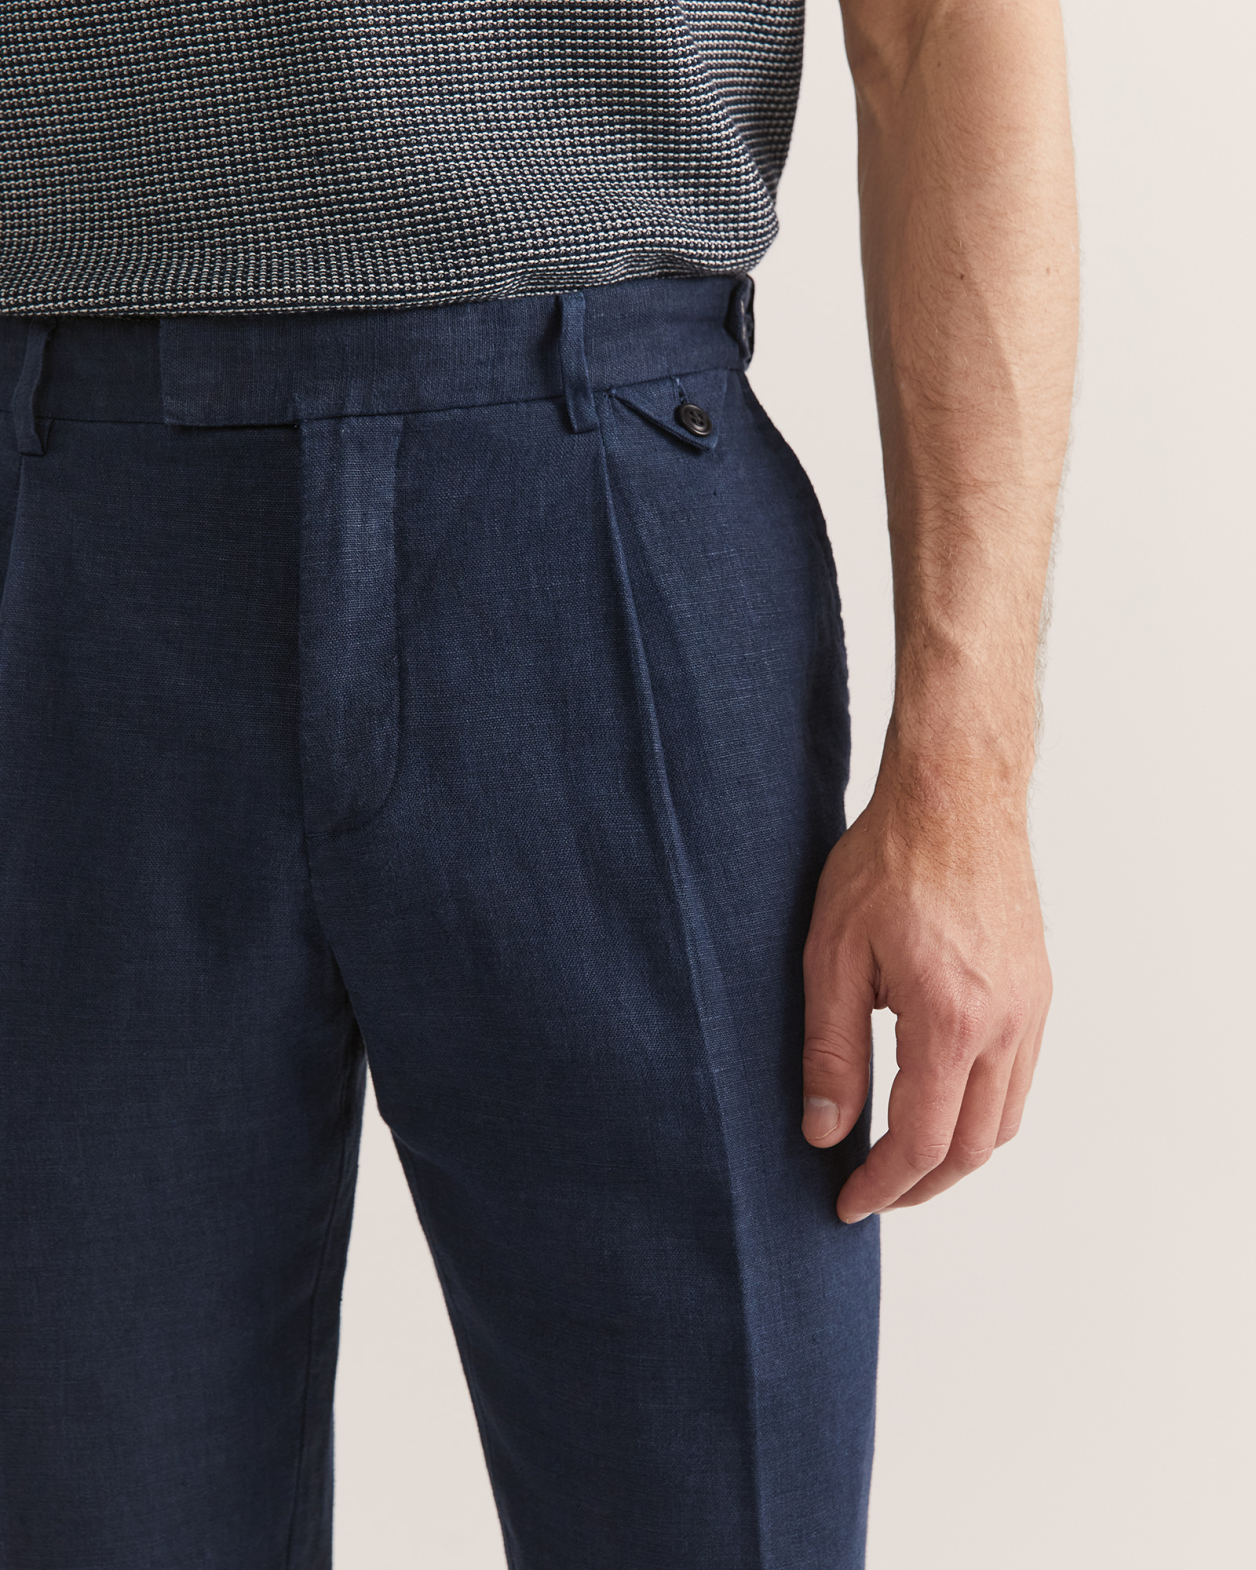 Wade Pleat Front Pant in NAVY